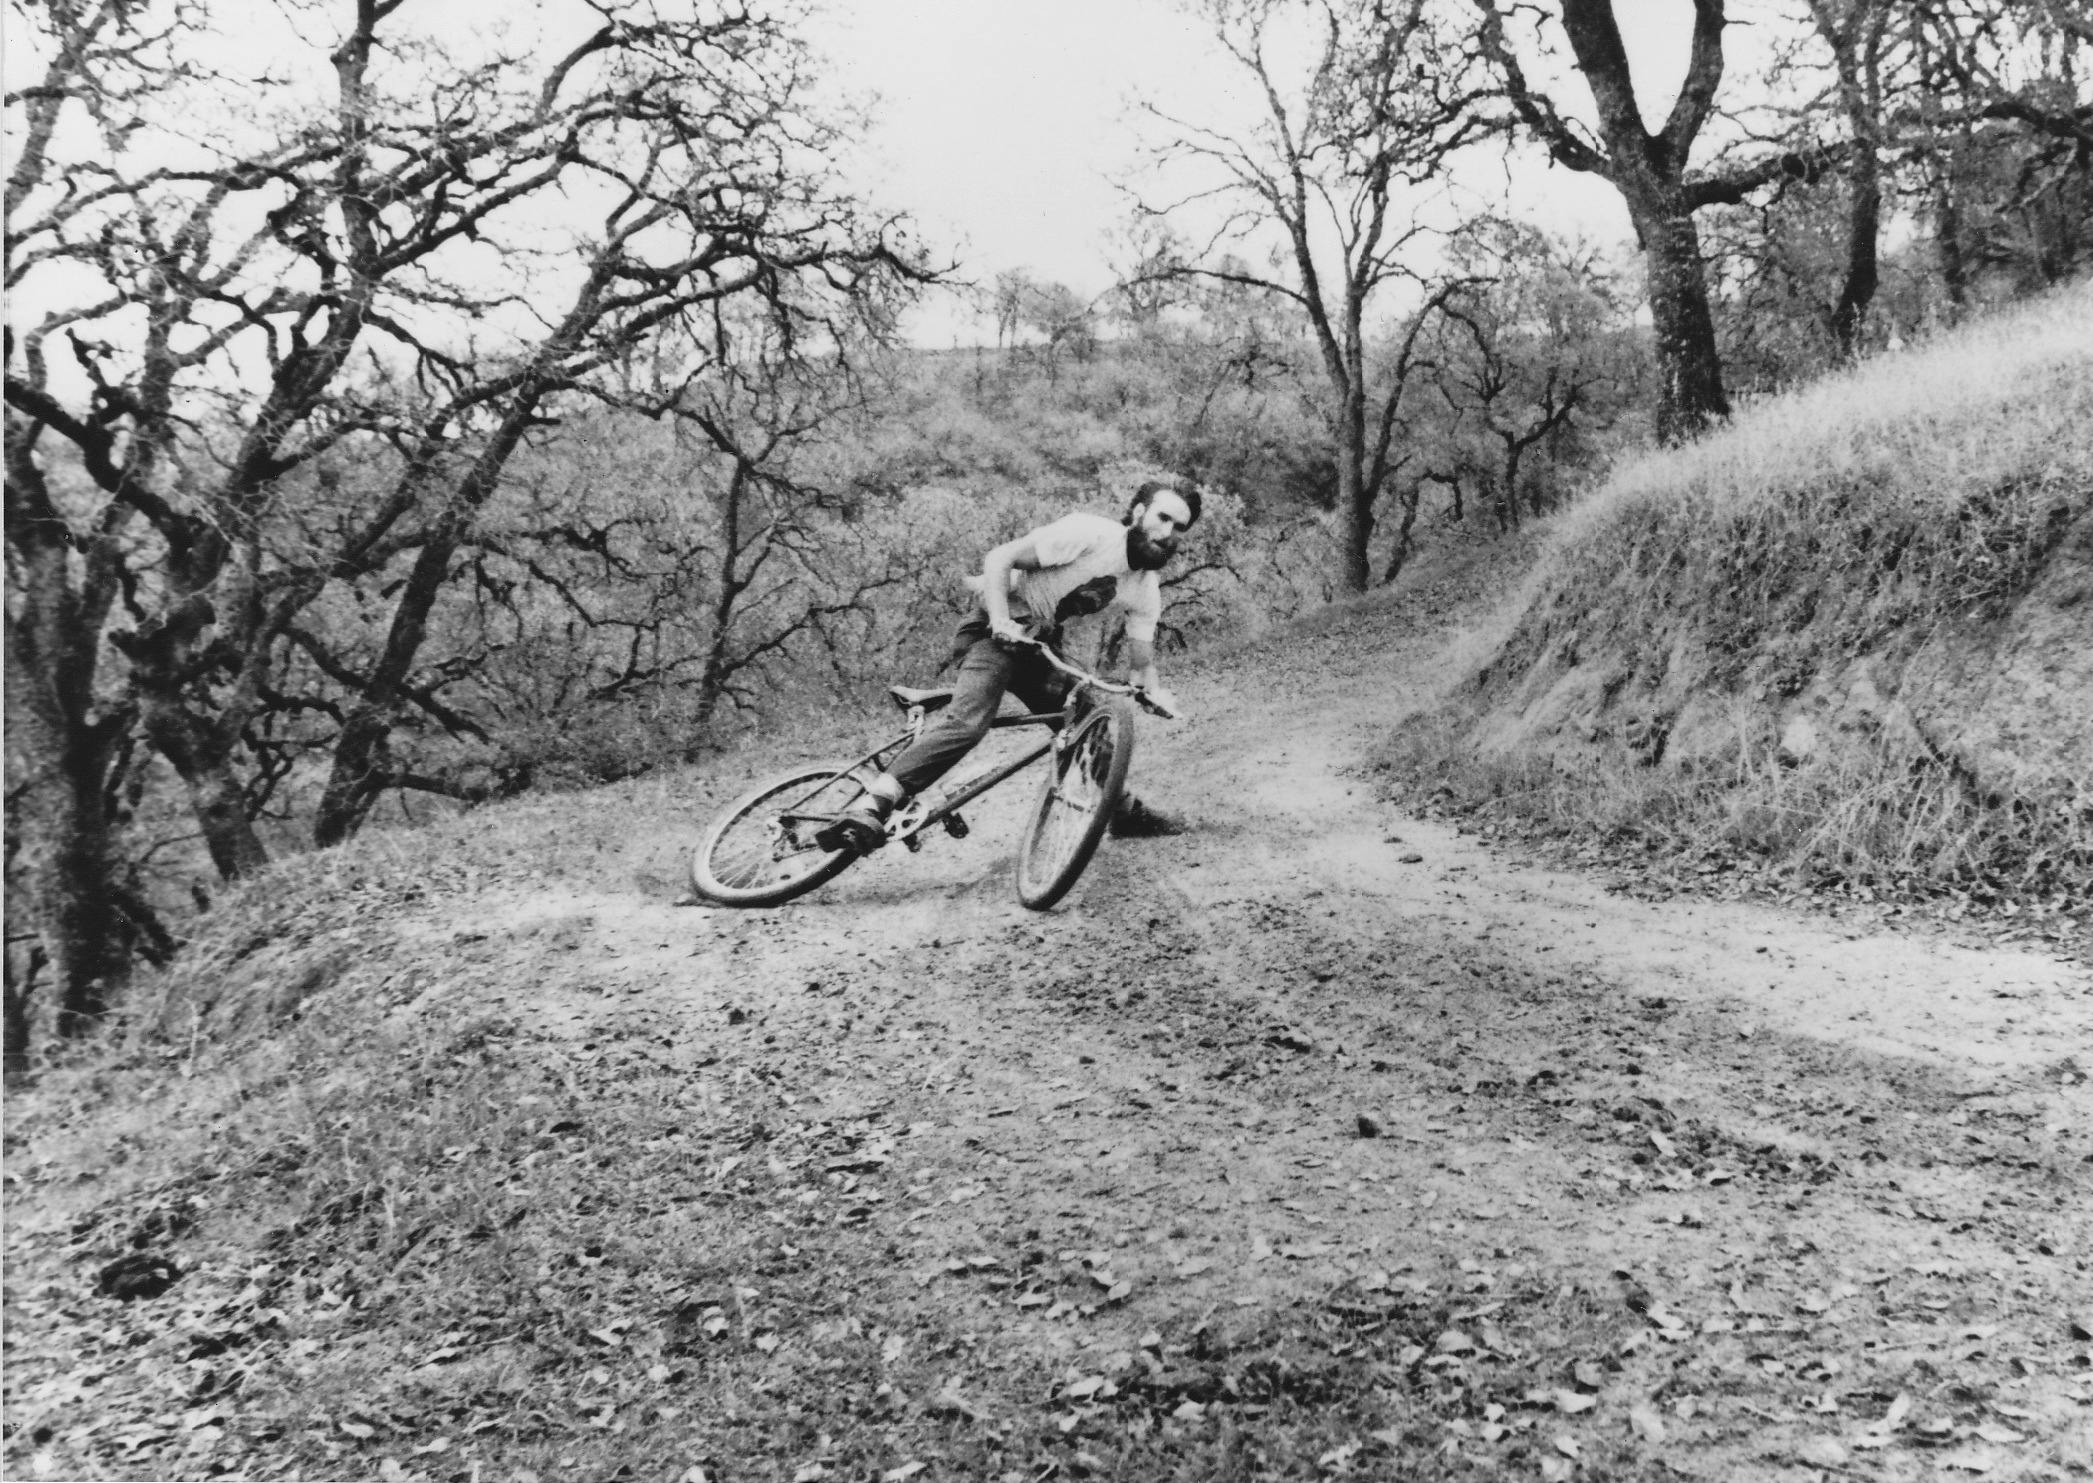 A black and white photo of Ibis Cycles Founder Scot Nicol on his Ibis #7 mountain bike on Mt. Diabo, CA in 1982.